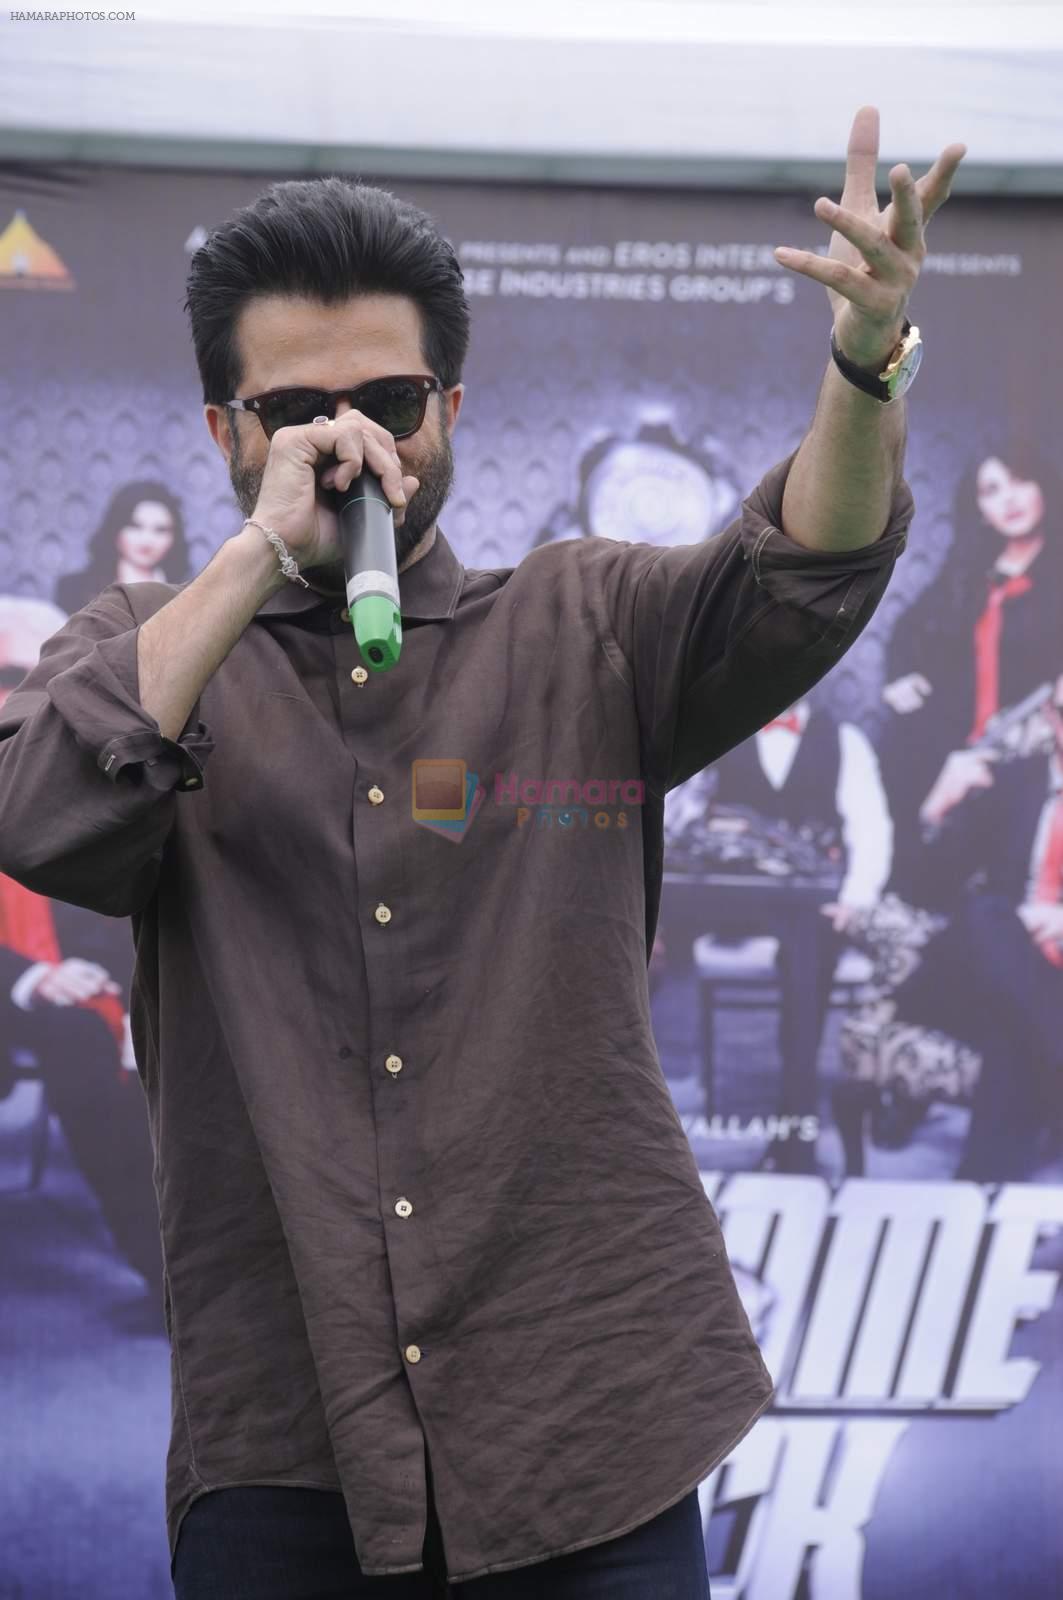 Anil Kapoor at welcome back delhi promotions in Mumbai on 1st Sept 2015